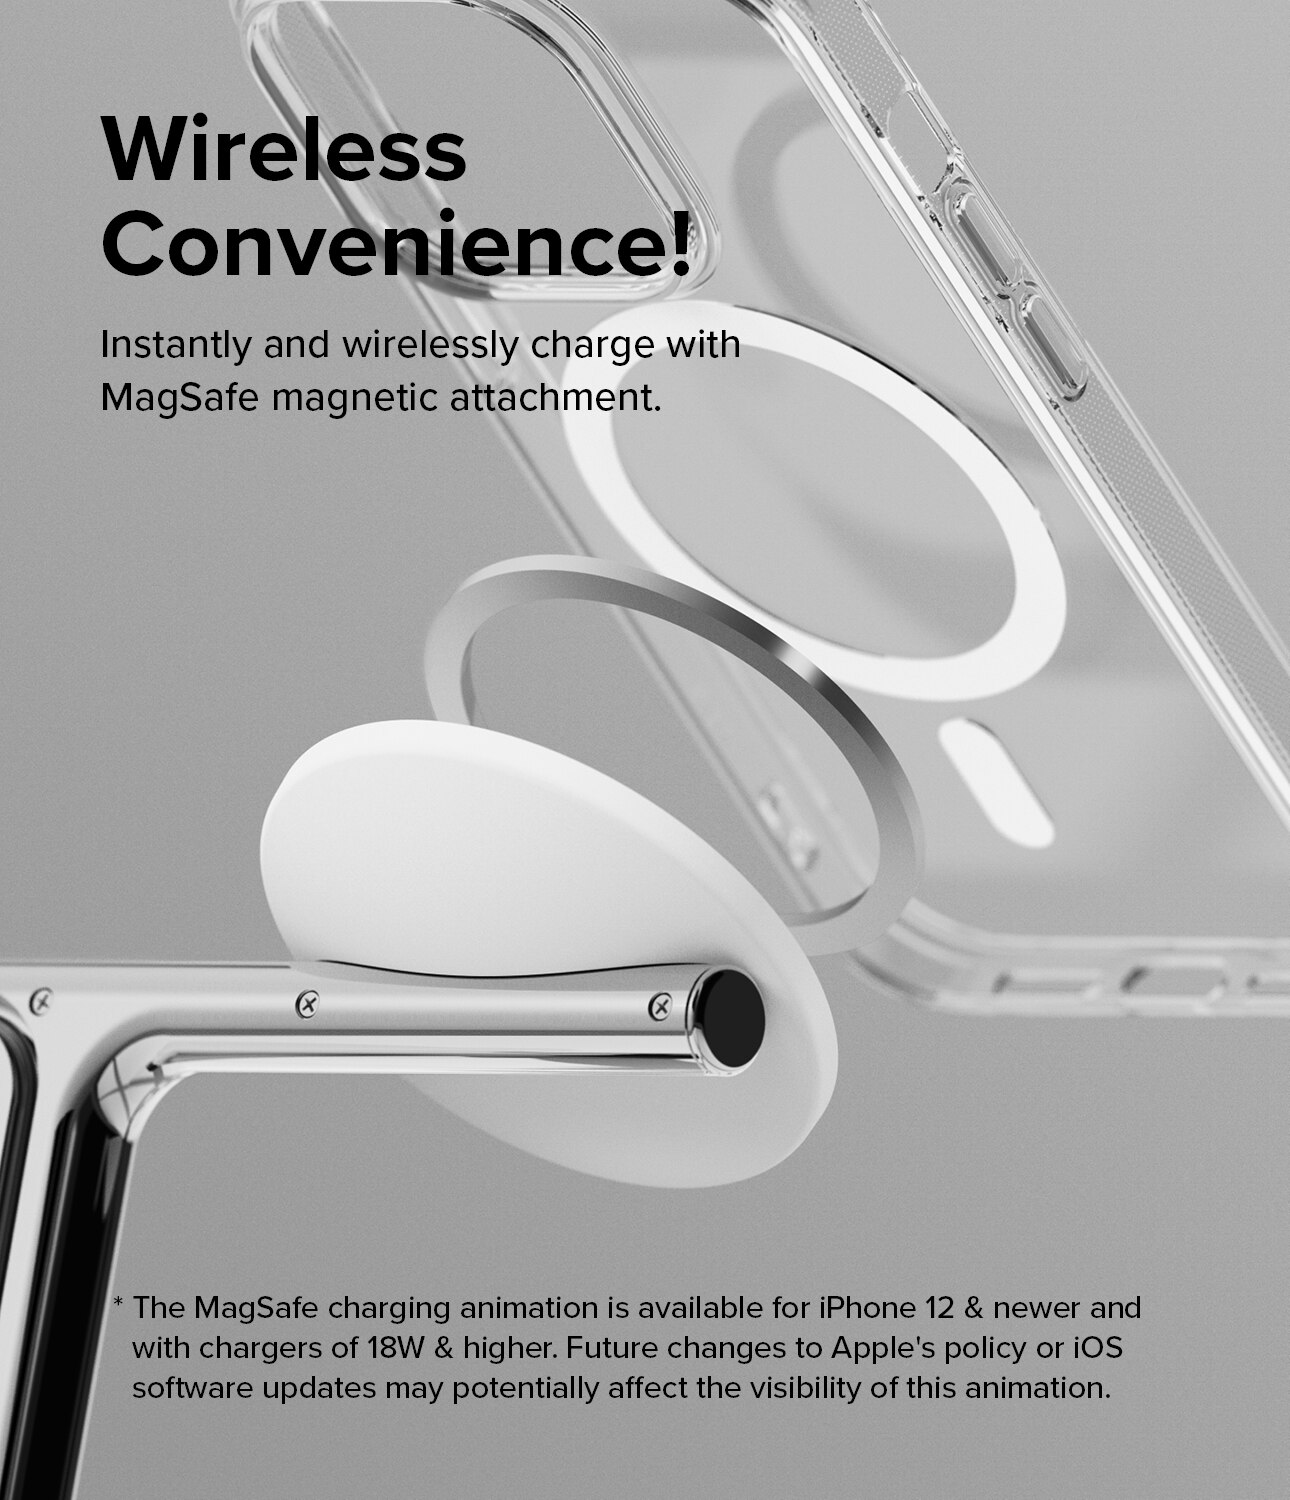 3-in-1 Wireless Charger Stand White